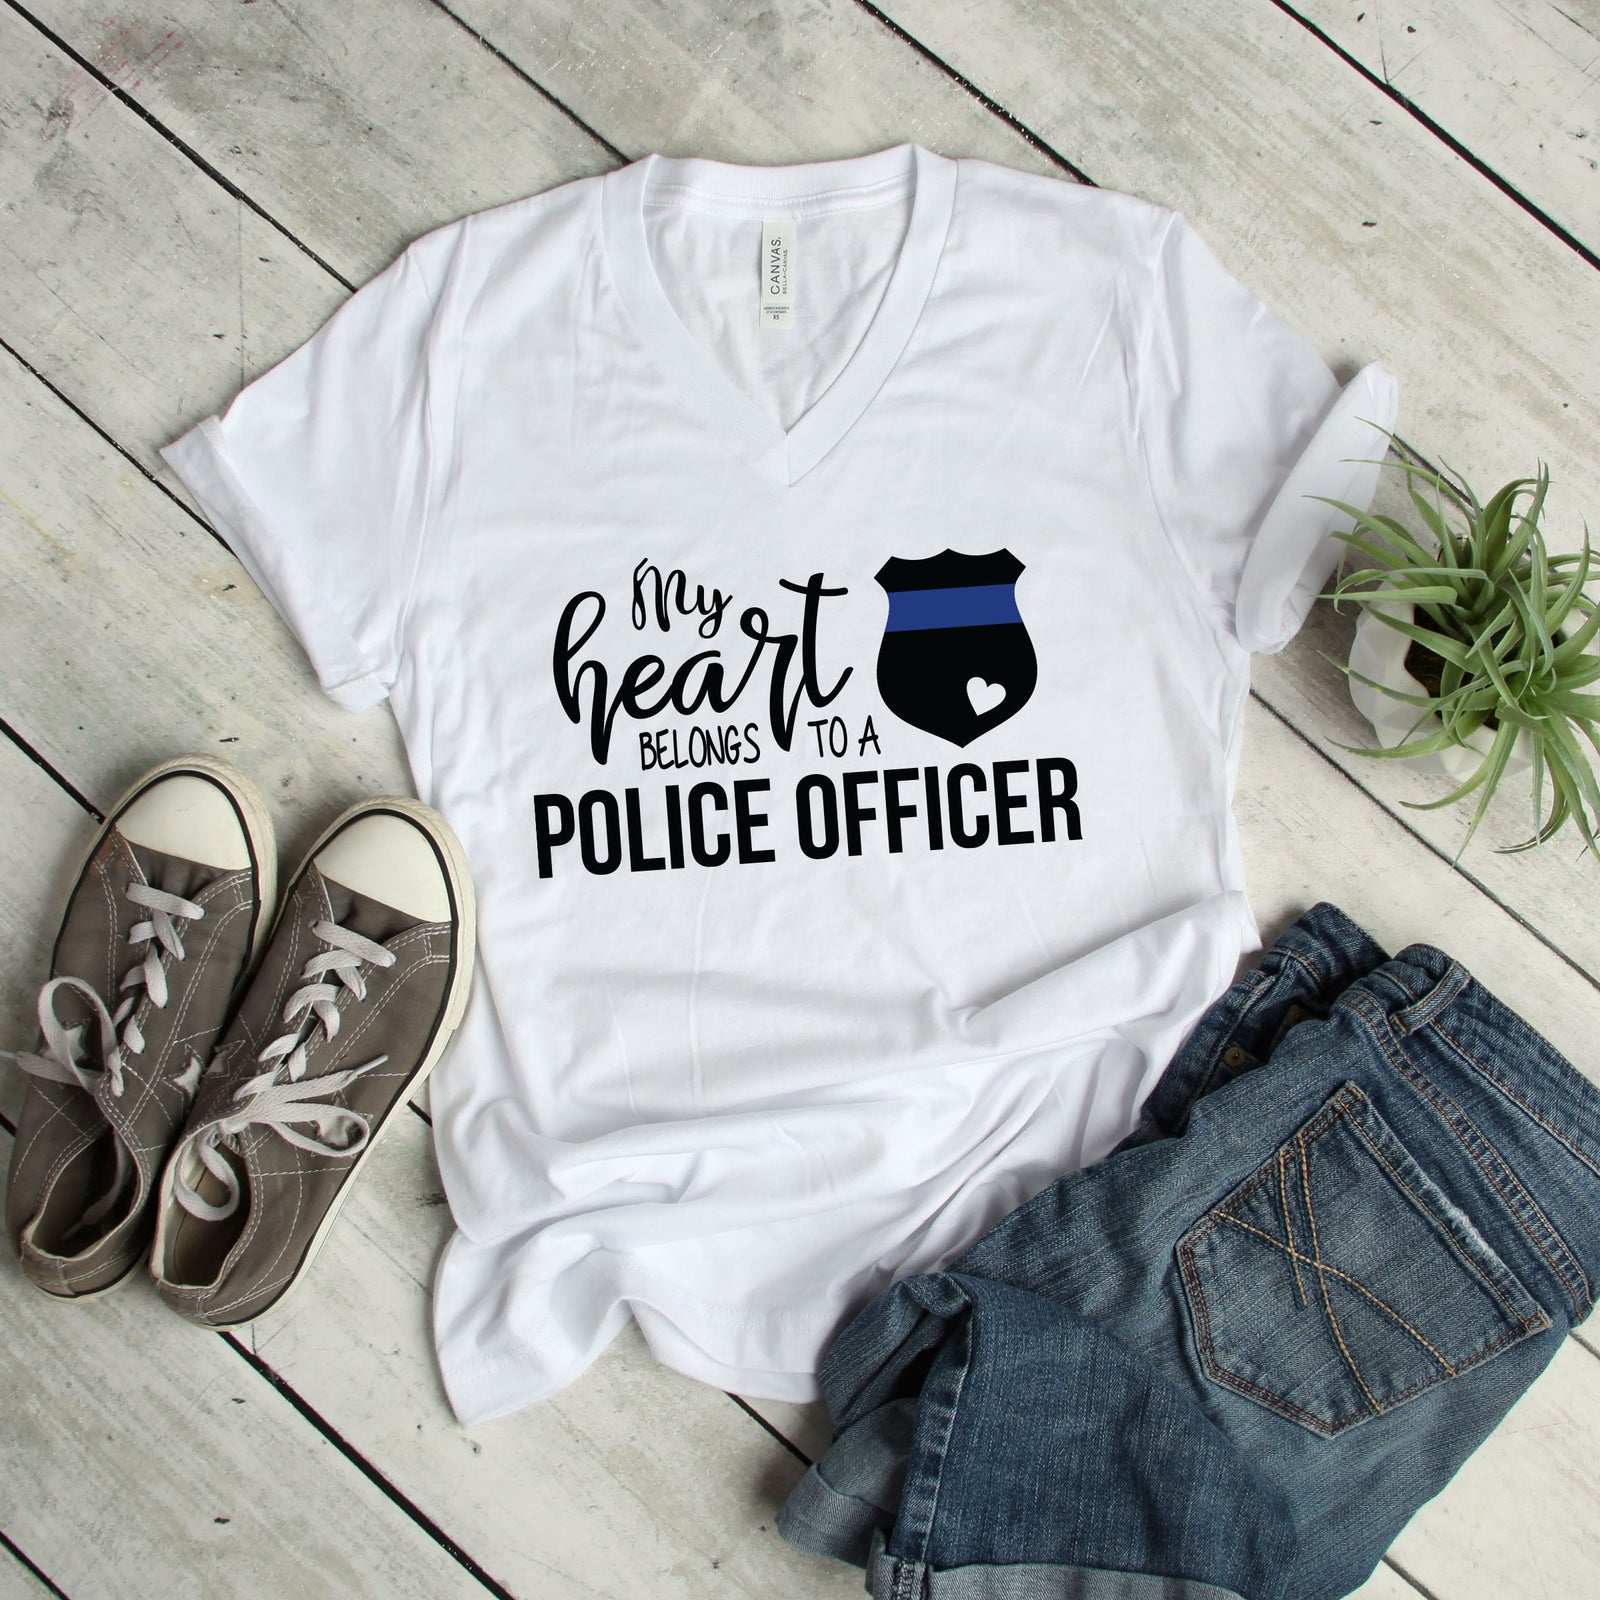 My Heart Belongs to a Police Officer - Police Officer Wife Shirt - Police Officer Love T Shirt - Police Wife Gift Shirt